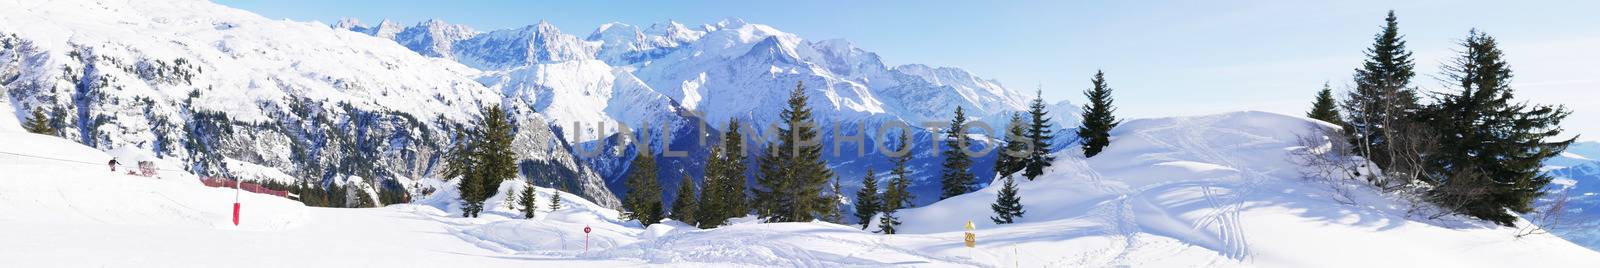 holiday at the foot of Mont Blanc, France by shovag